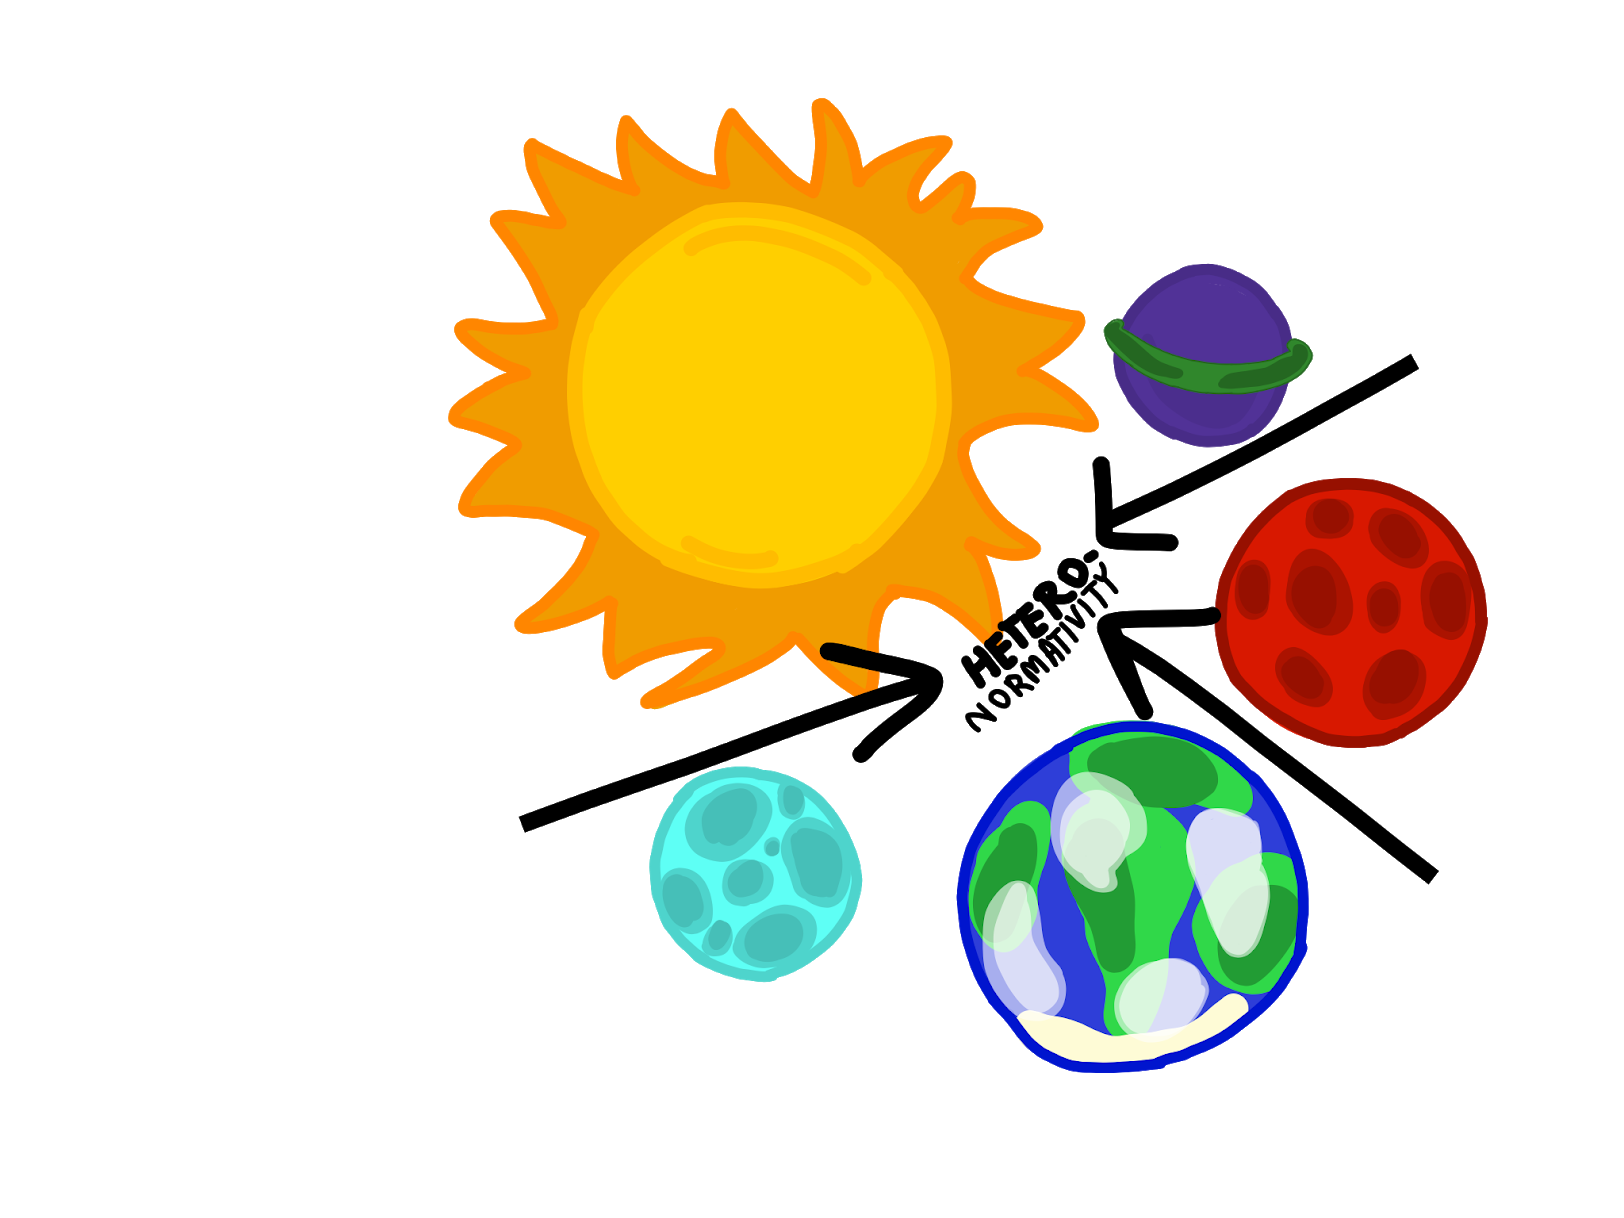 illustration of planets and sun revolving around the word "heteronormativity"